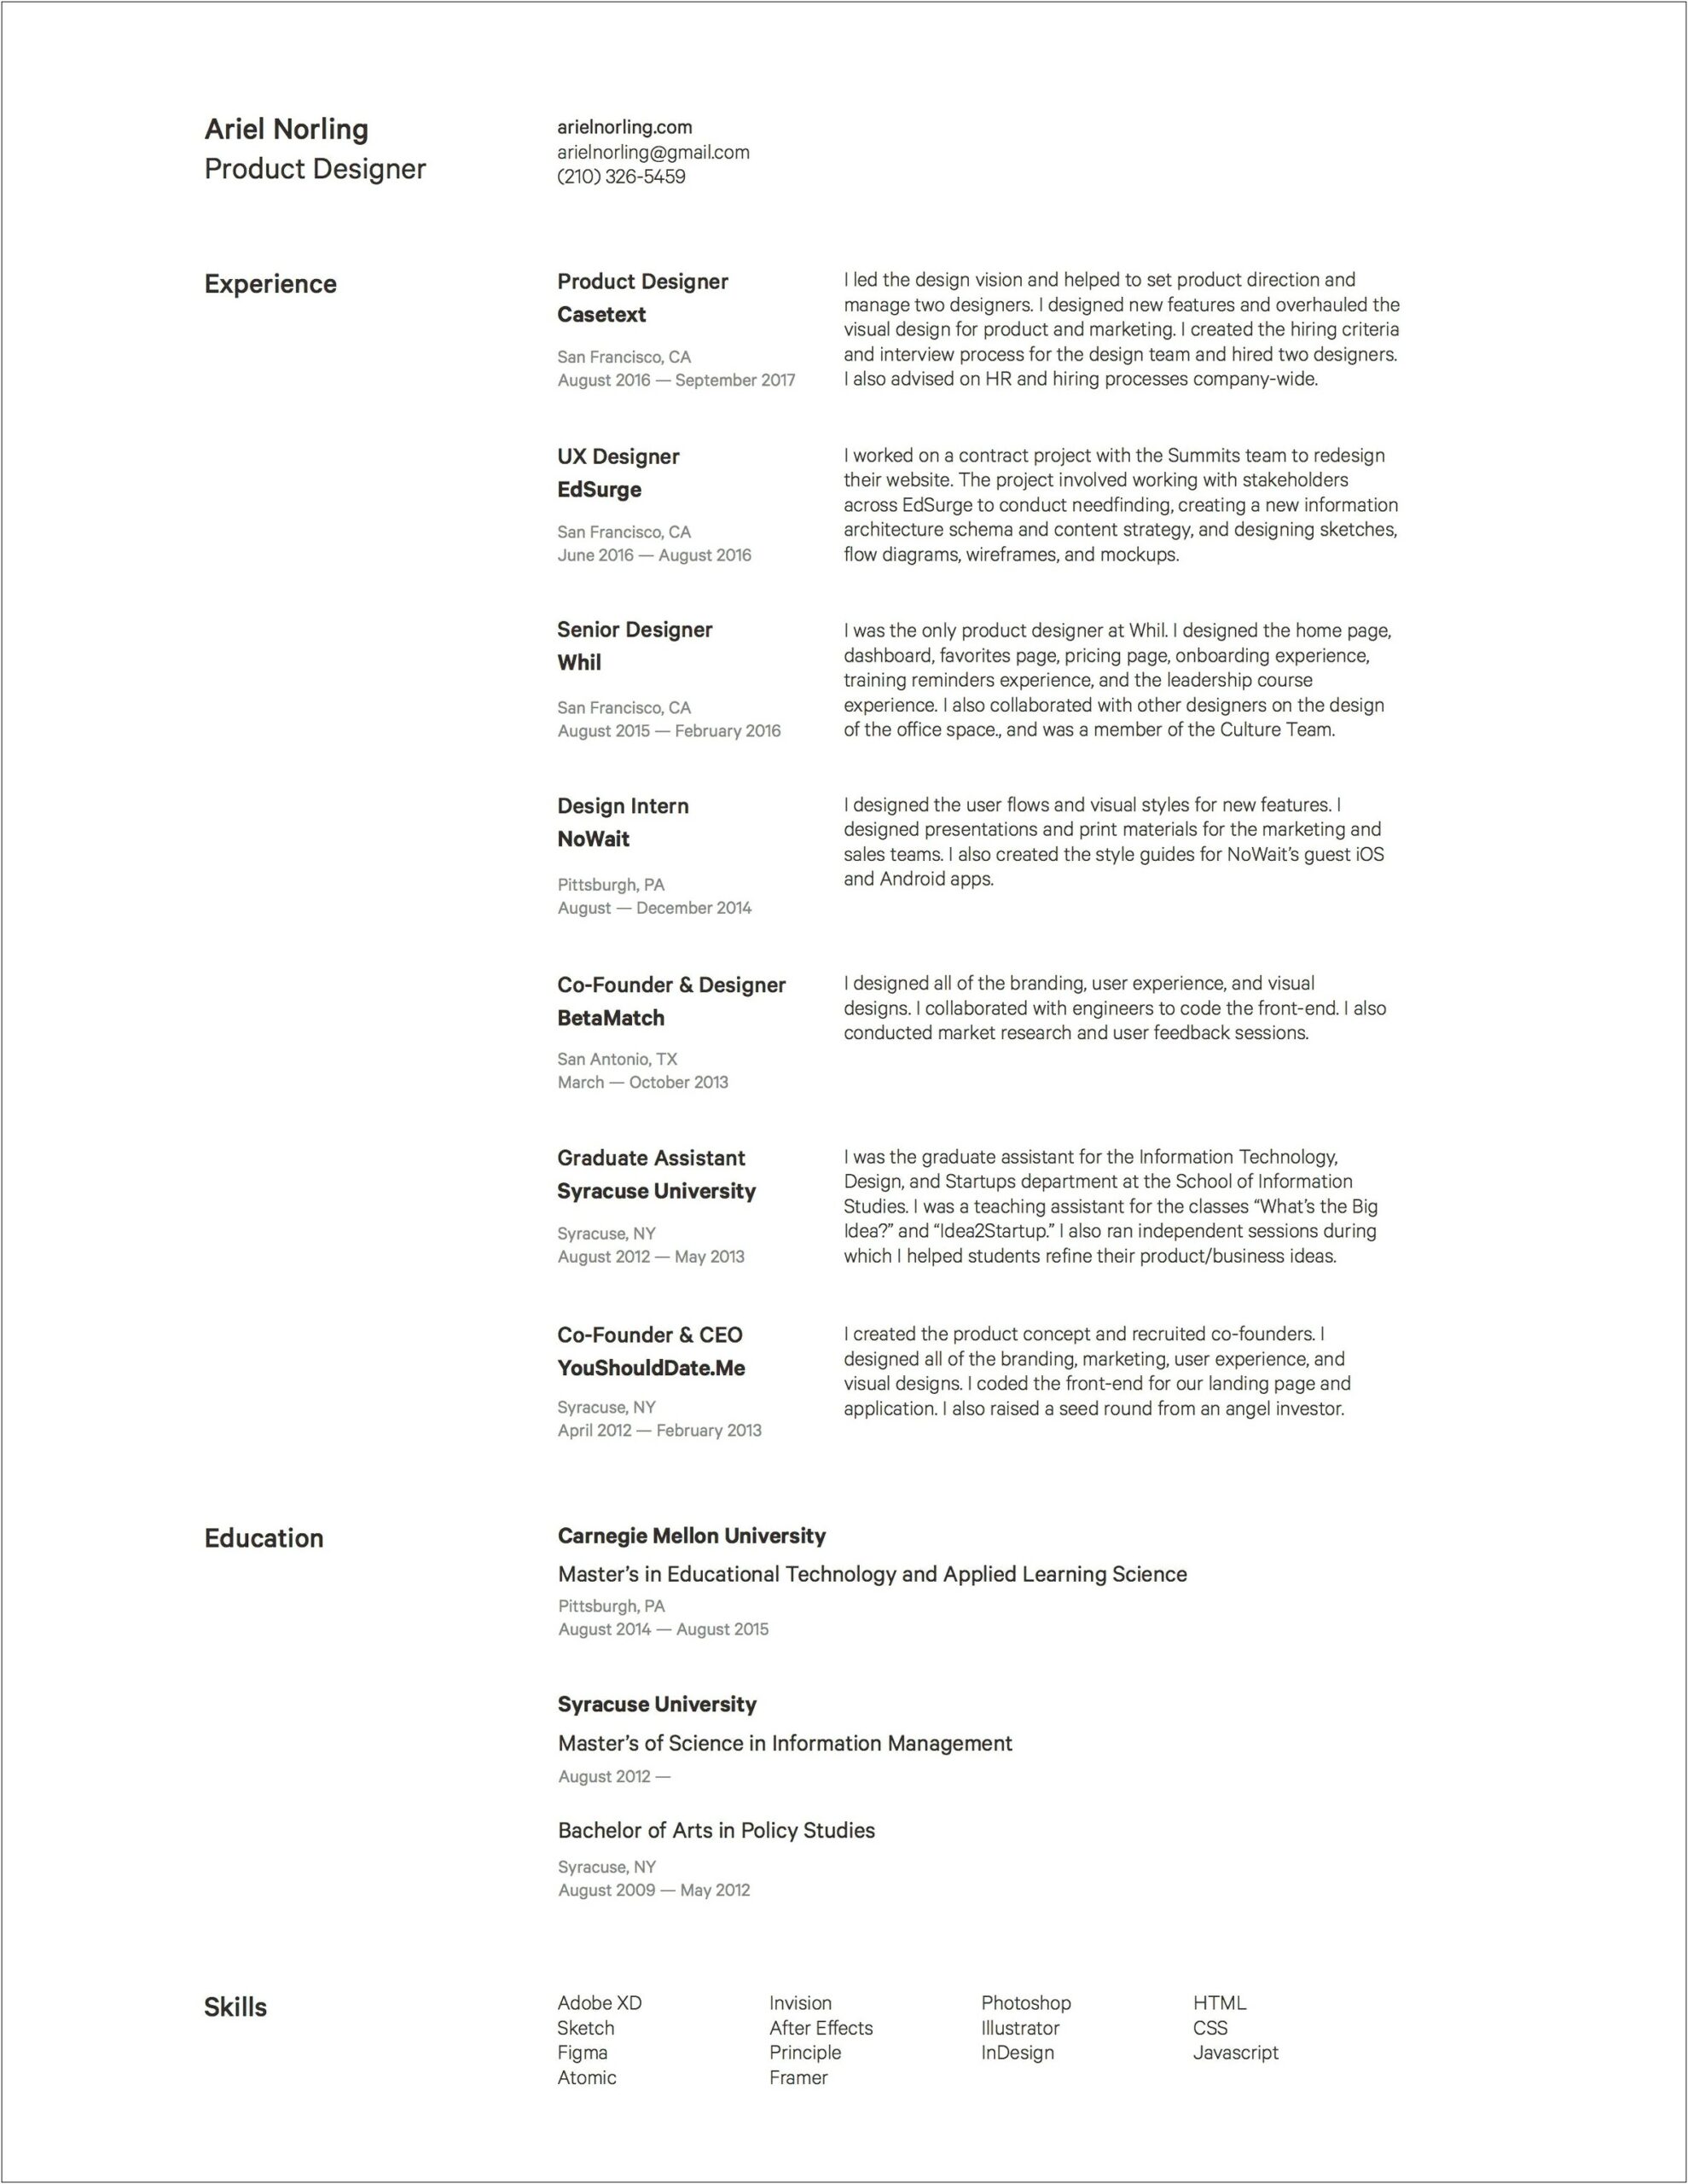 Is Ariel A Good Font For Engineer Resumes